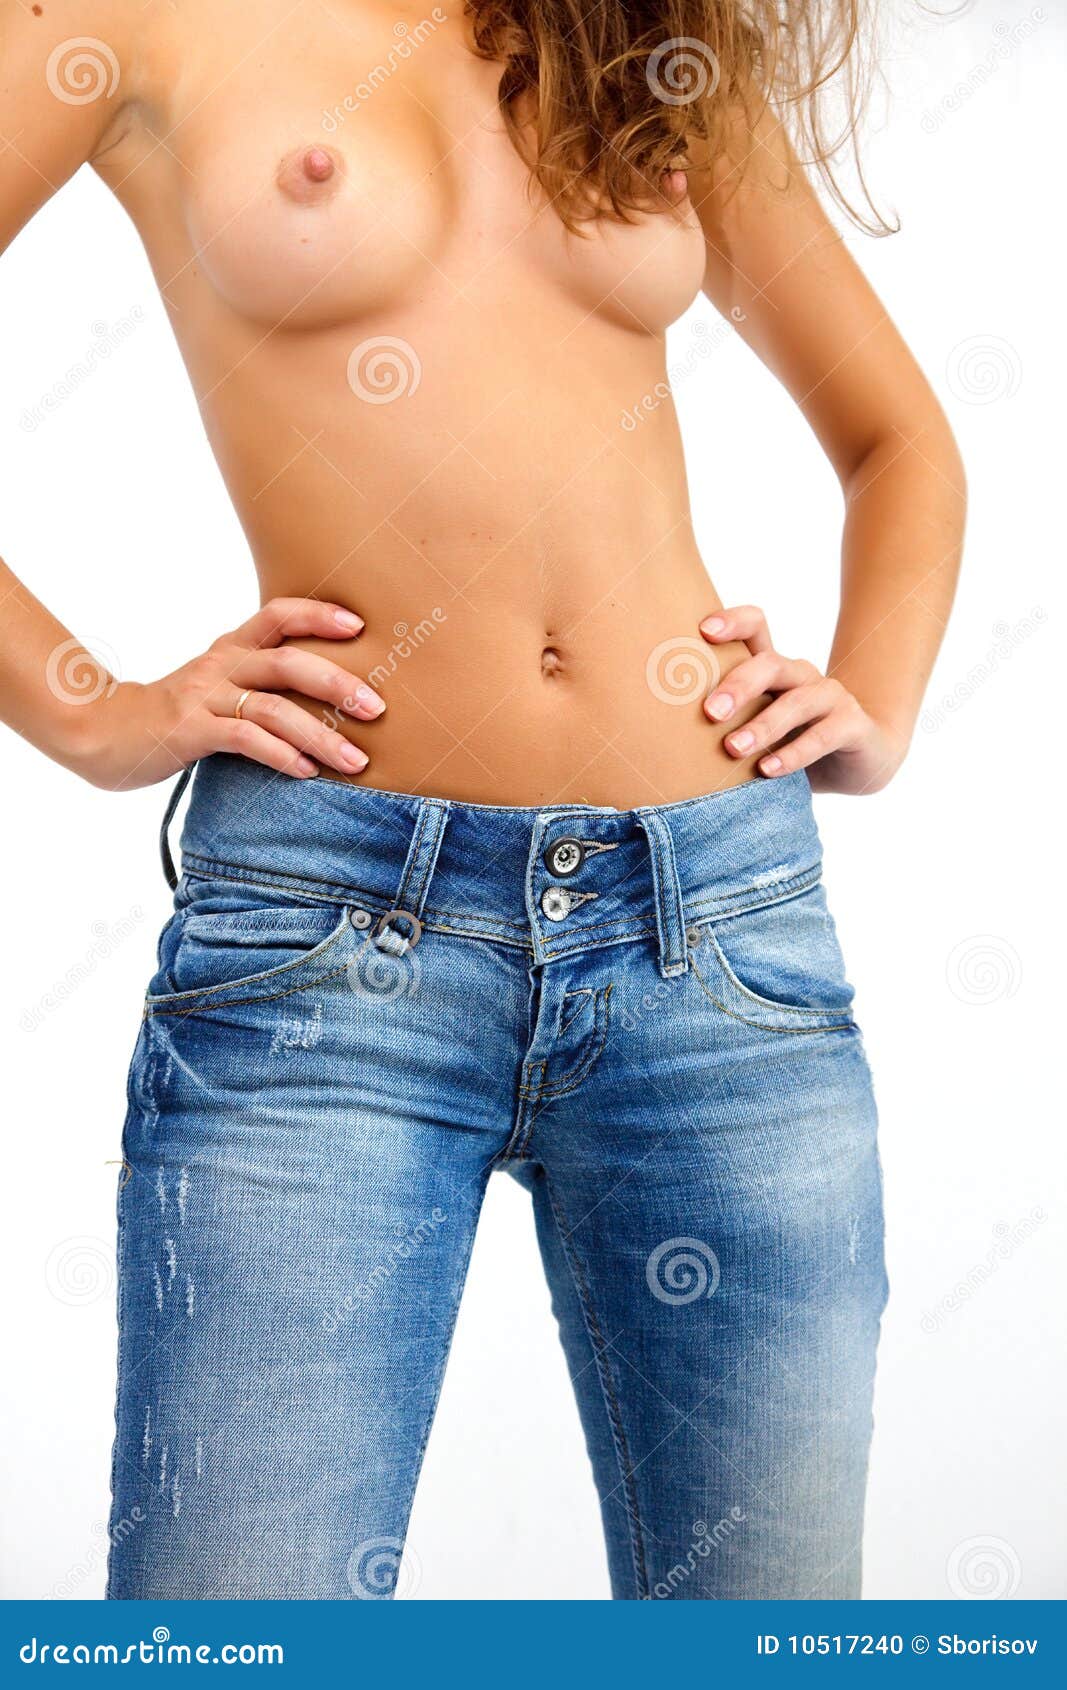 nude girls in blue jeans topless